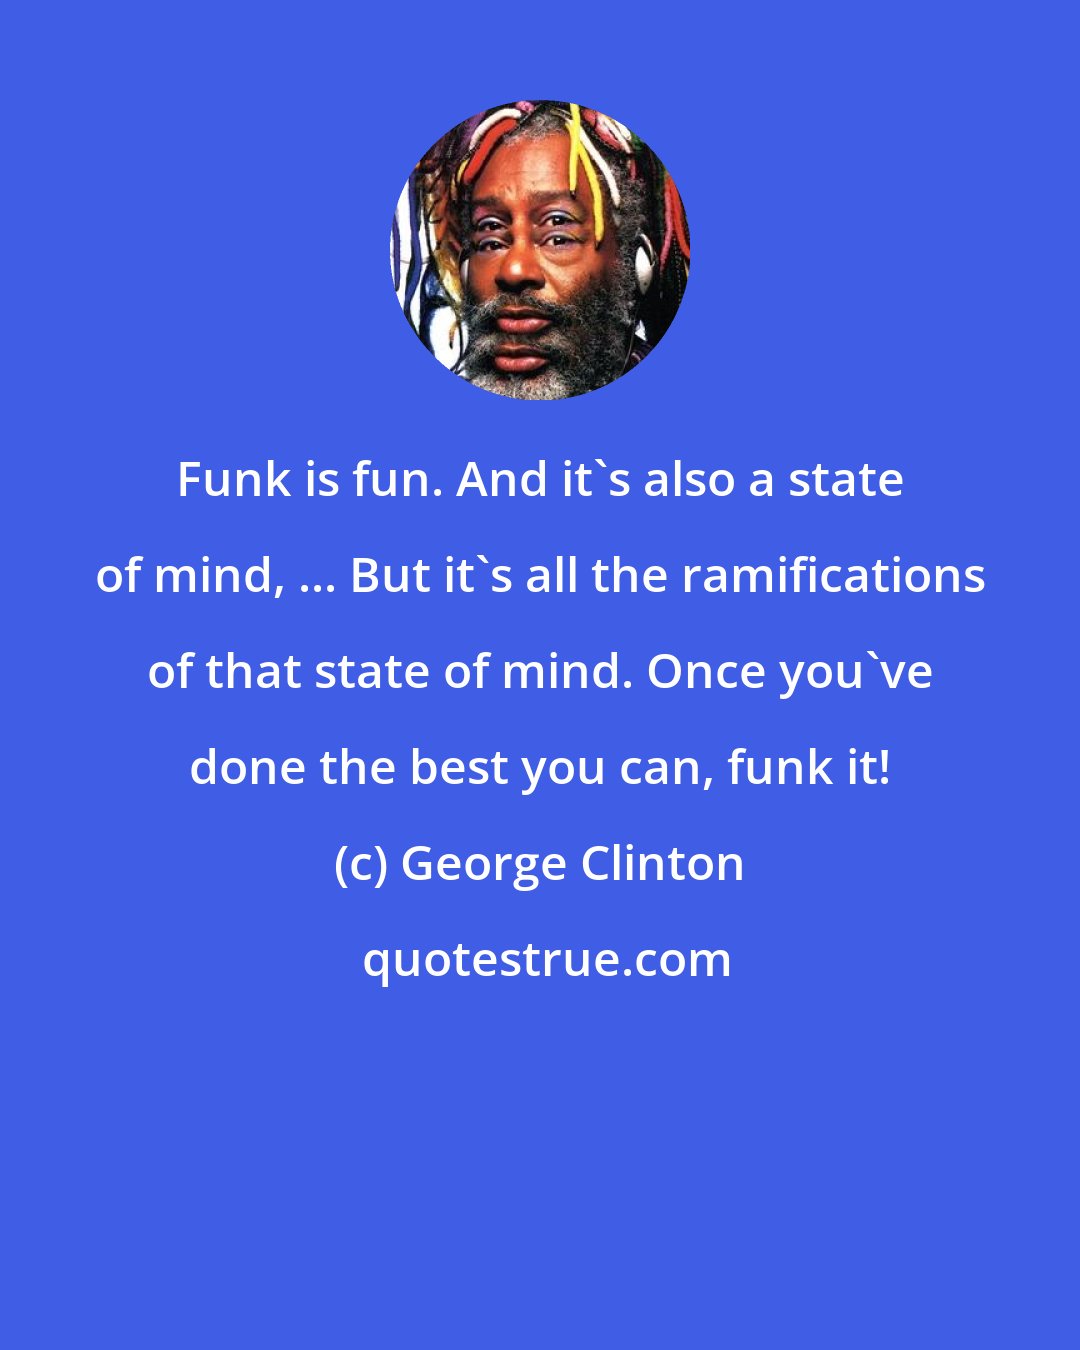 George Clinton: Funk is fun. And it's also a state of mind, ... But it's all the ramifications of that state of mind. Once you've done the best you can, funk it!